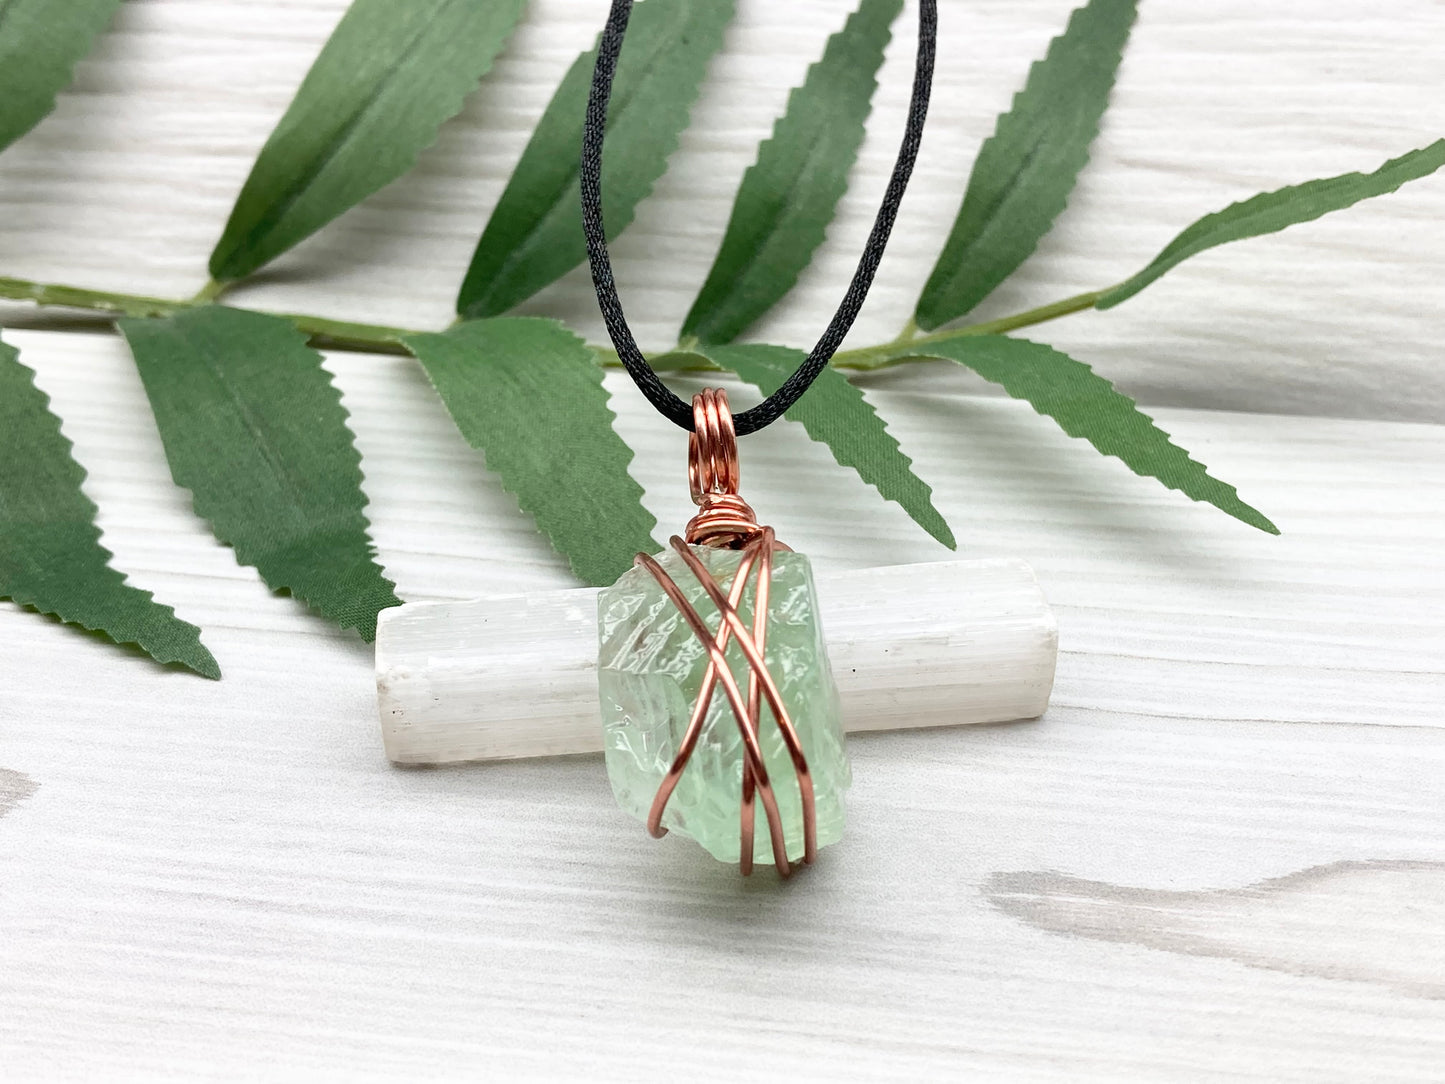 Green Calcite Necklace. Copper Wire Wrapped Stone Pendant. Raw Light Green Crystal. Comes On A Black Chain. Hand Crafted Metaphysical Jewelry For Him Or Her.